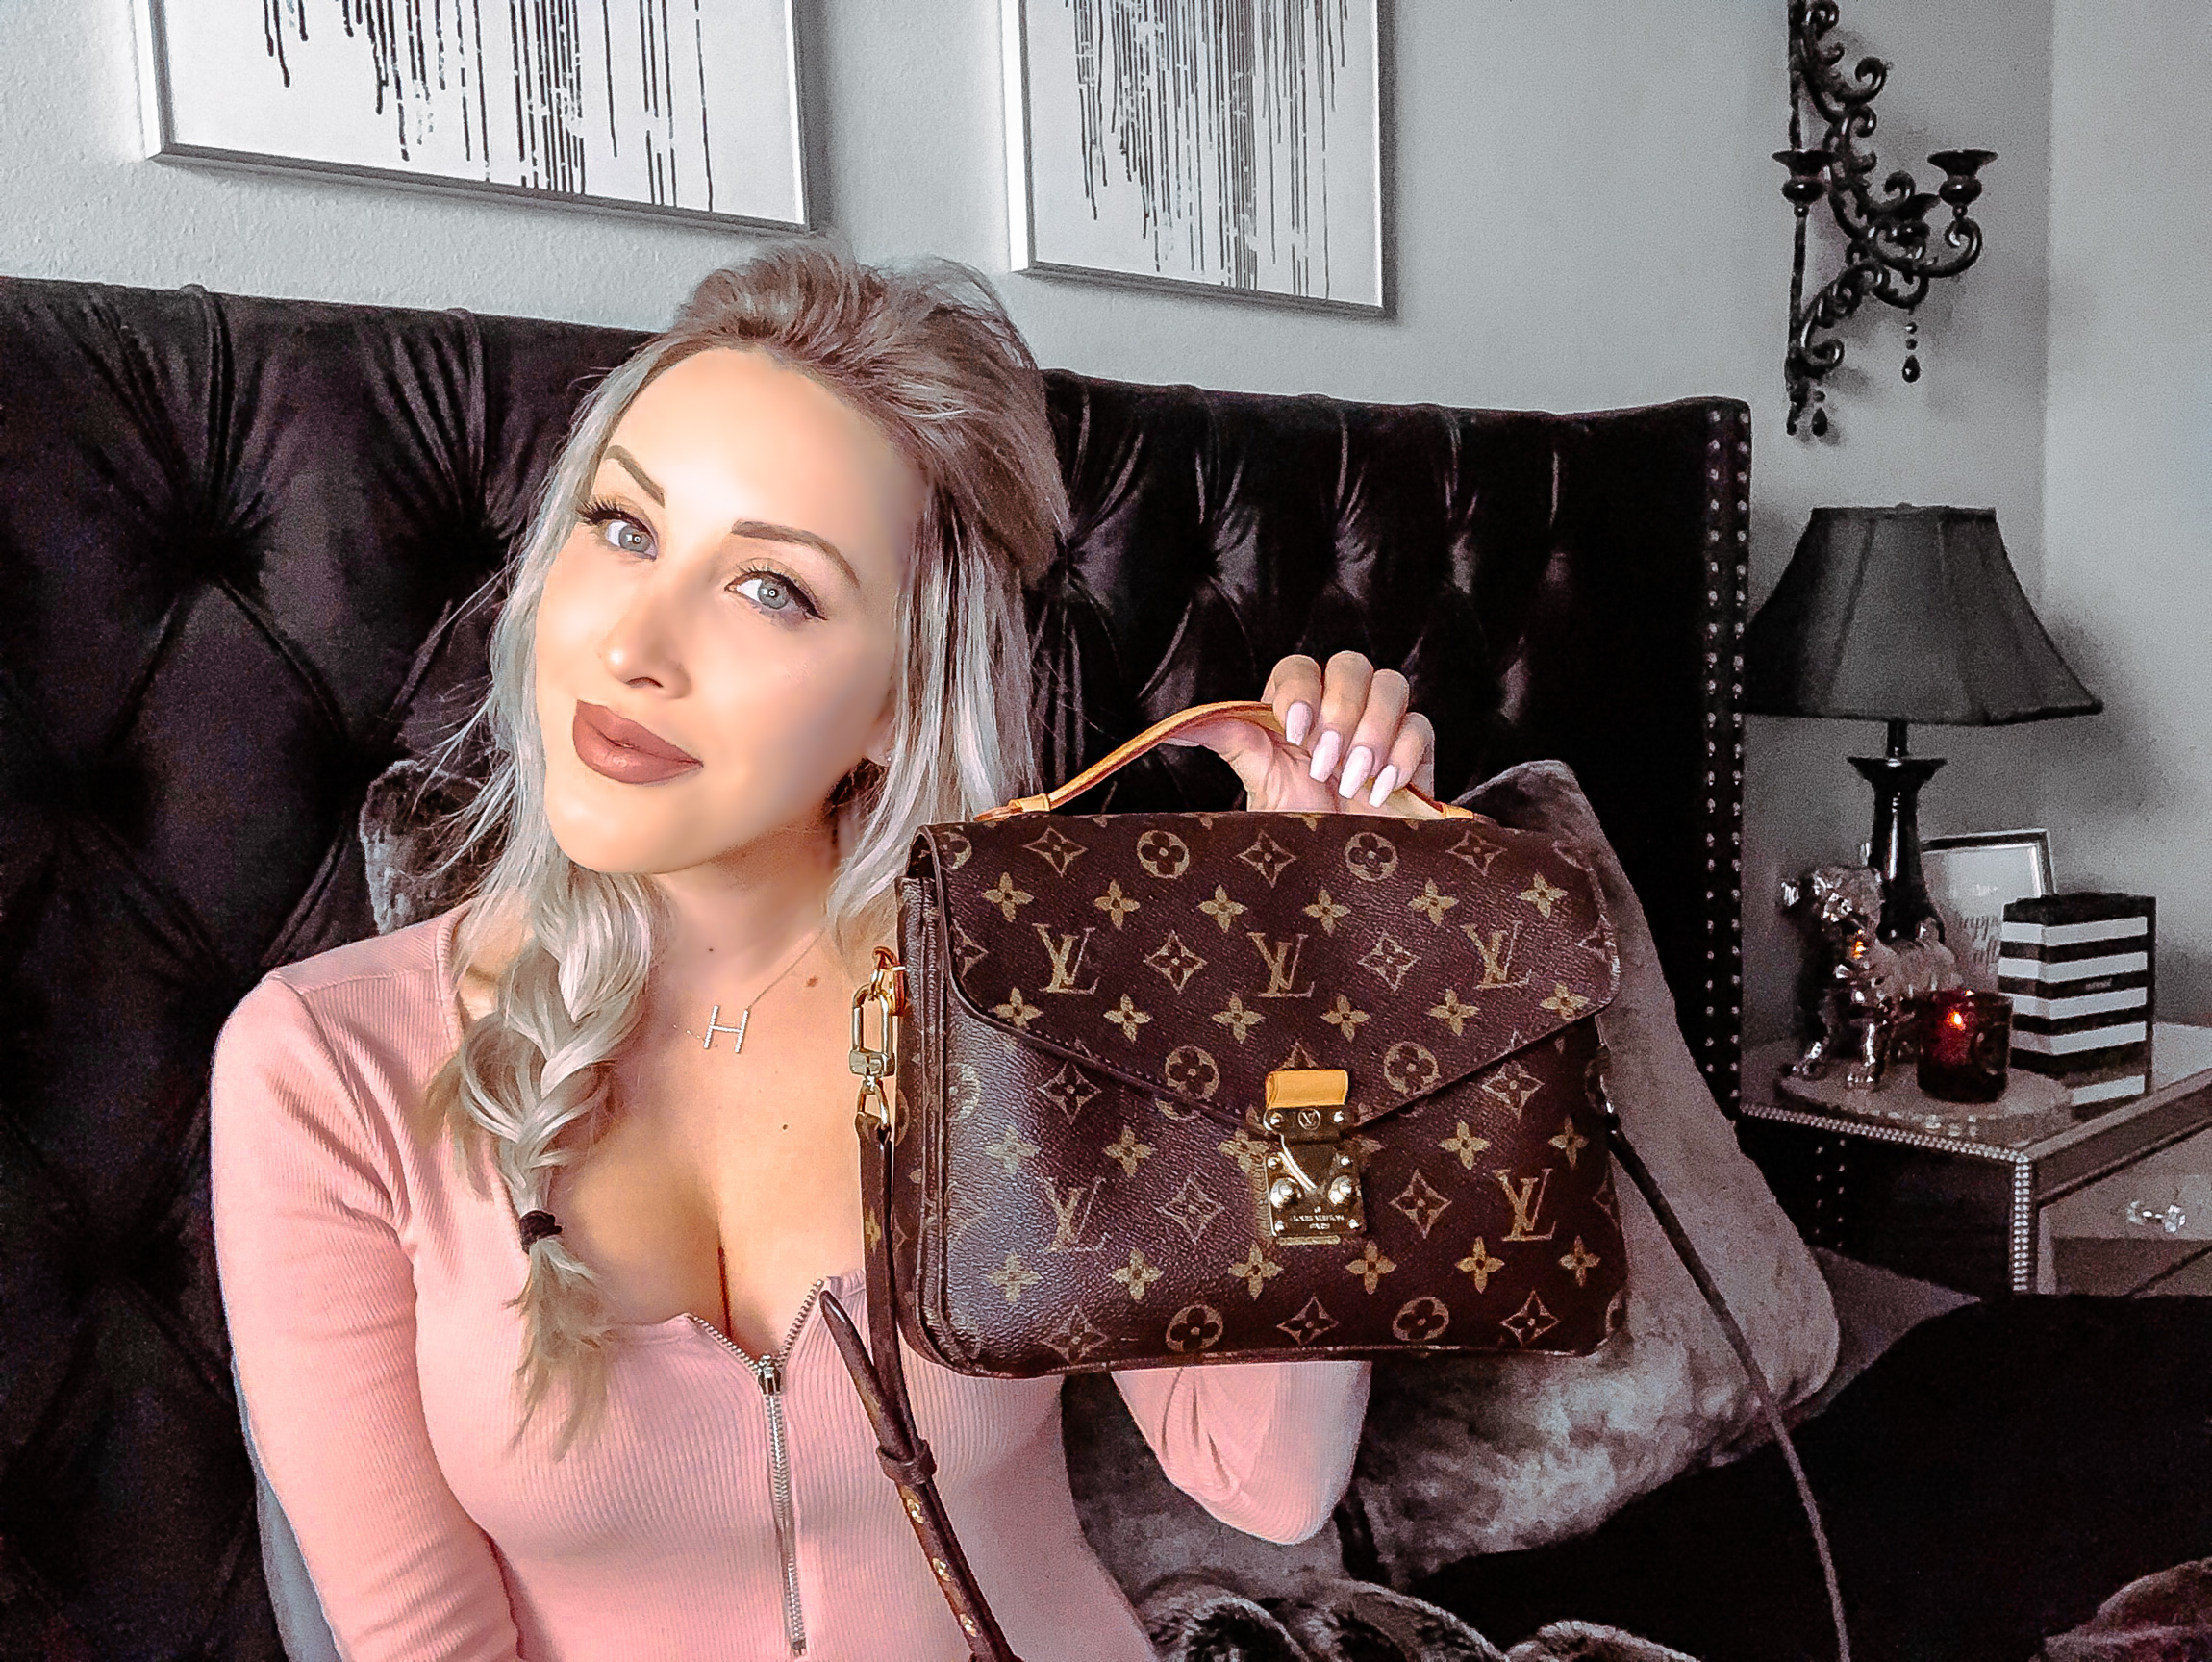 Louis Vuitton Pochette Metis Bag Review Archives - BLONDIE IN THE CITY